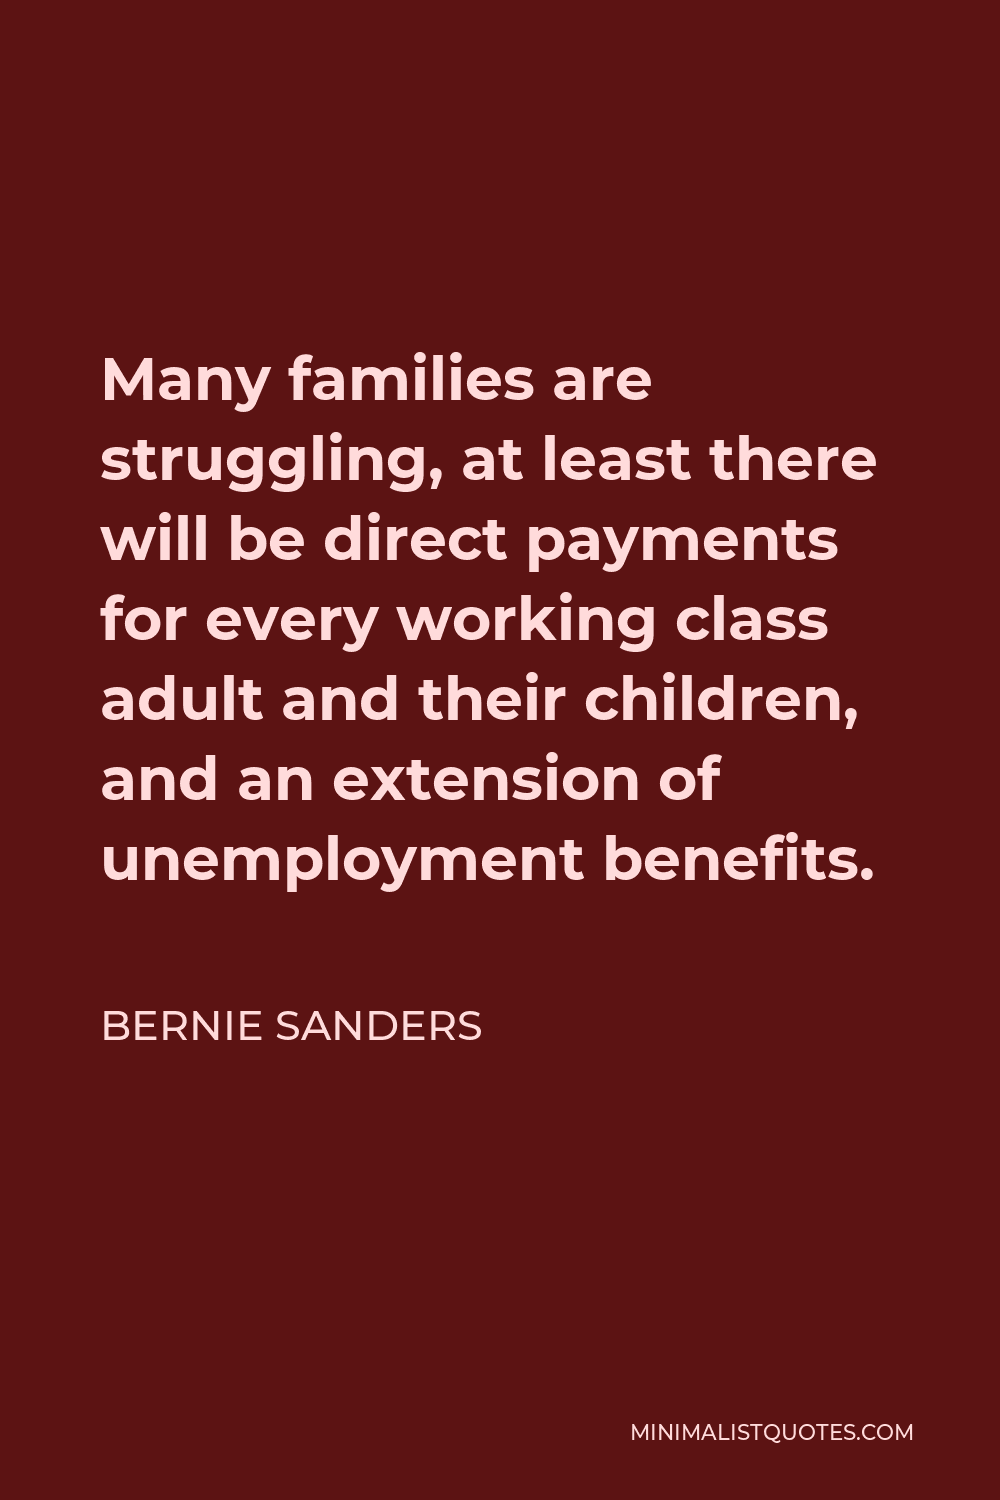 Bernie Sanders Quote - Many families are struggling, at least there will be direct payments for every working class adult and their children, and an extension of unemployment benefits.